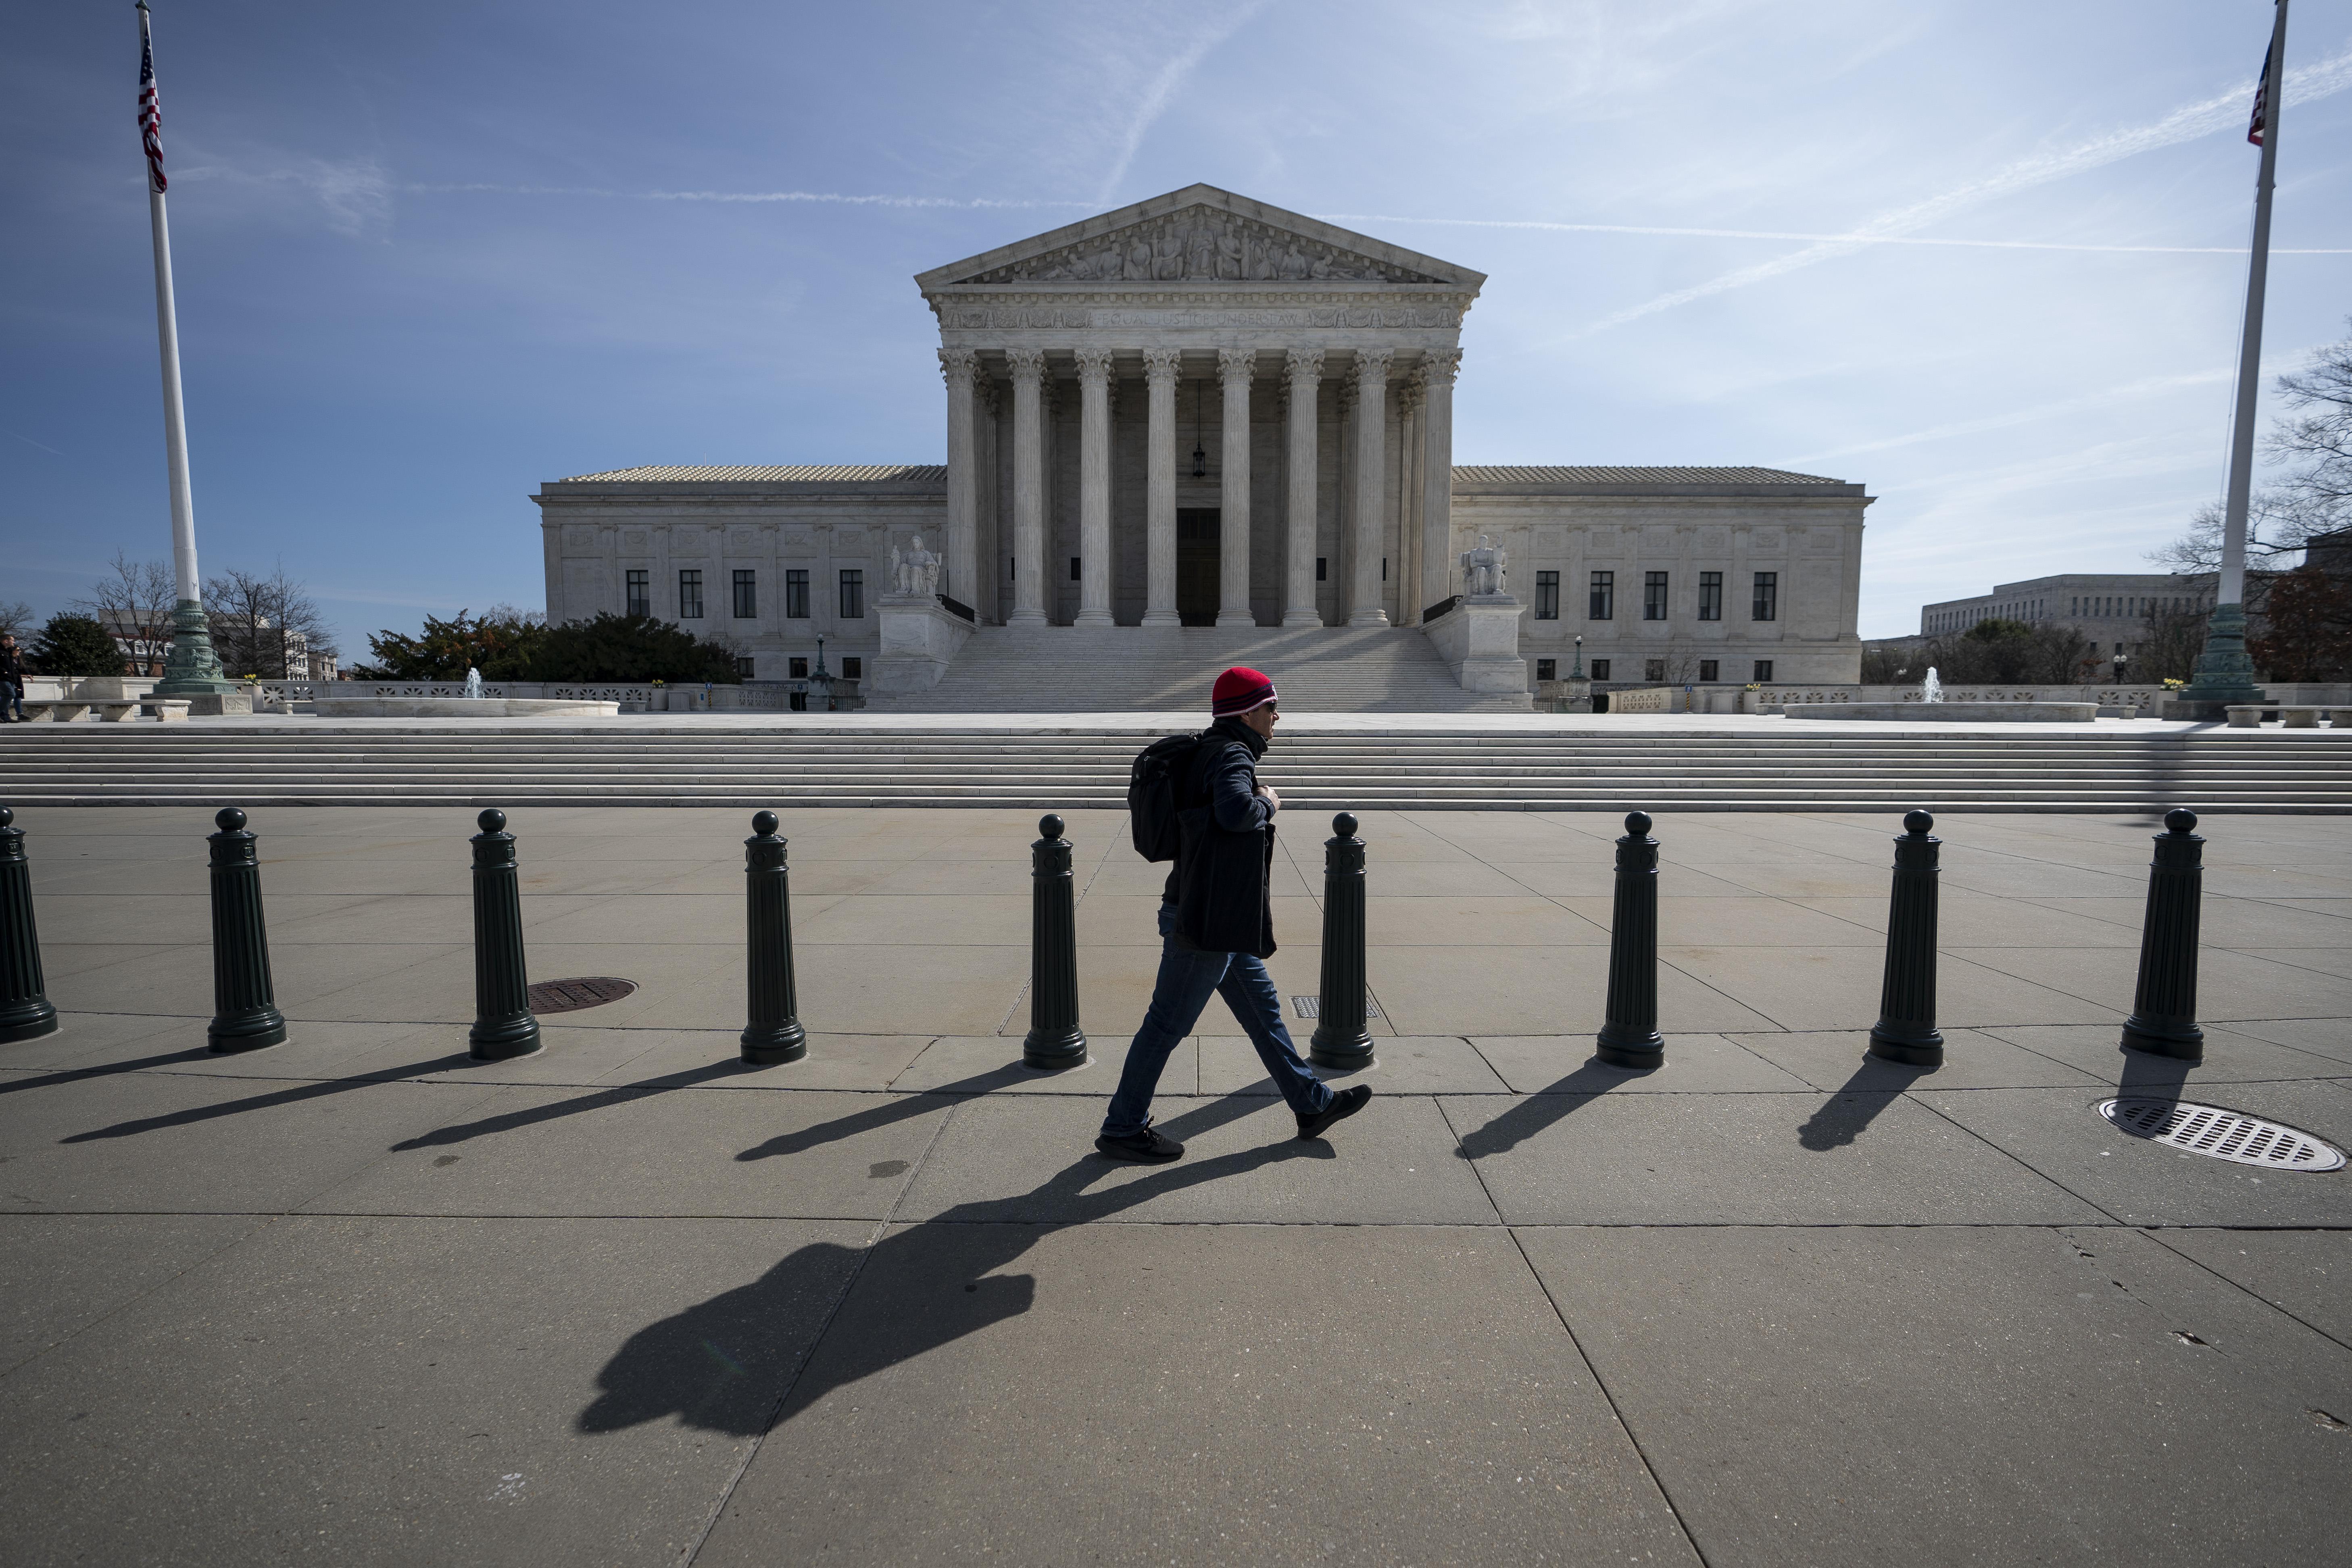 A man walks past the empty steps of the Supreme Court.